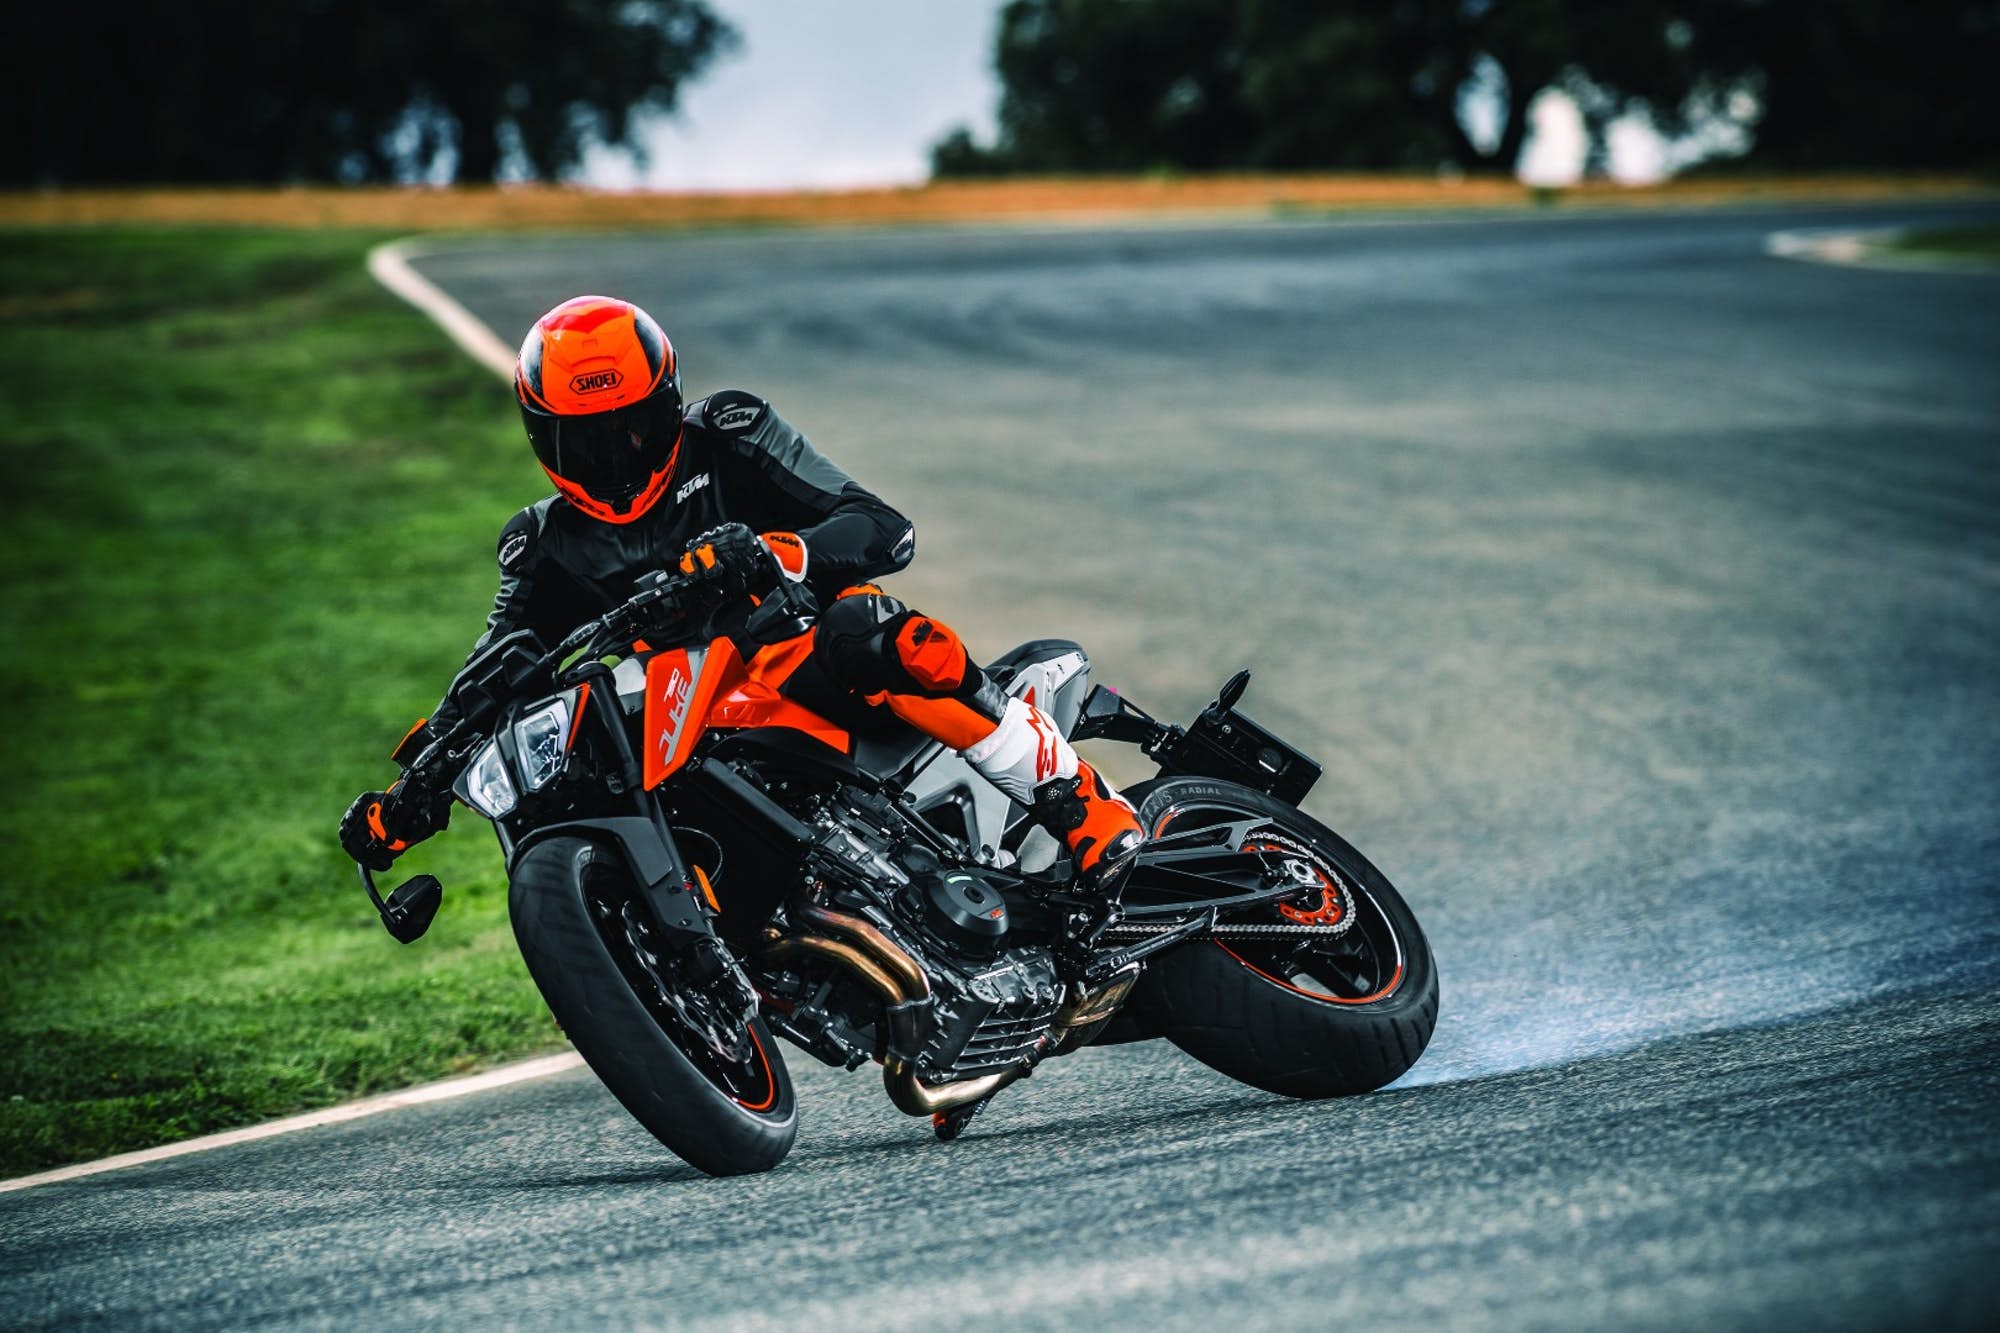 The 2018 KTM Duke 790: All new from the ground up with a brand new